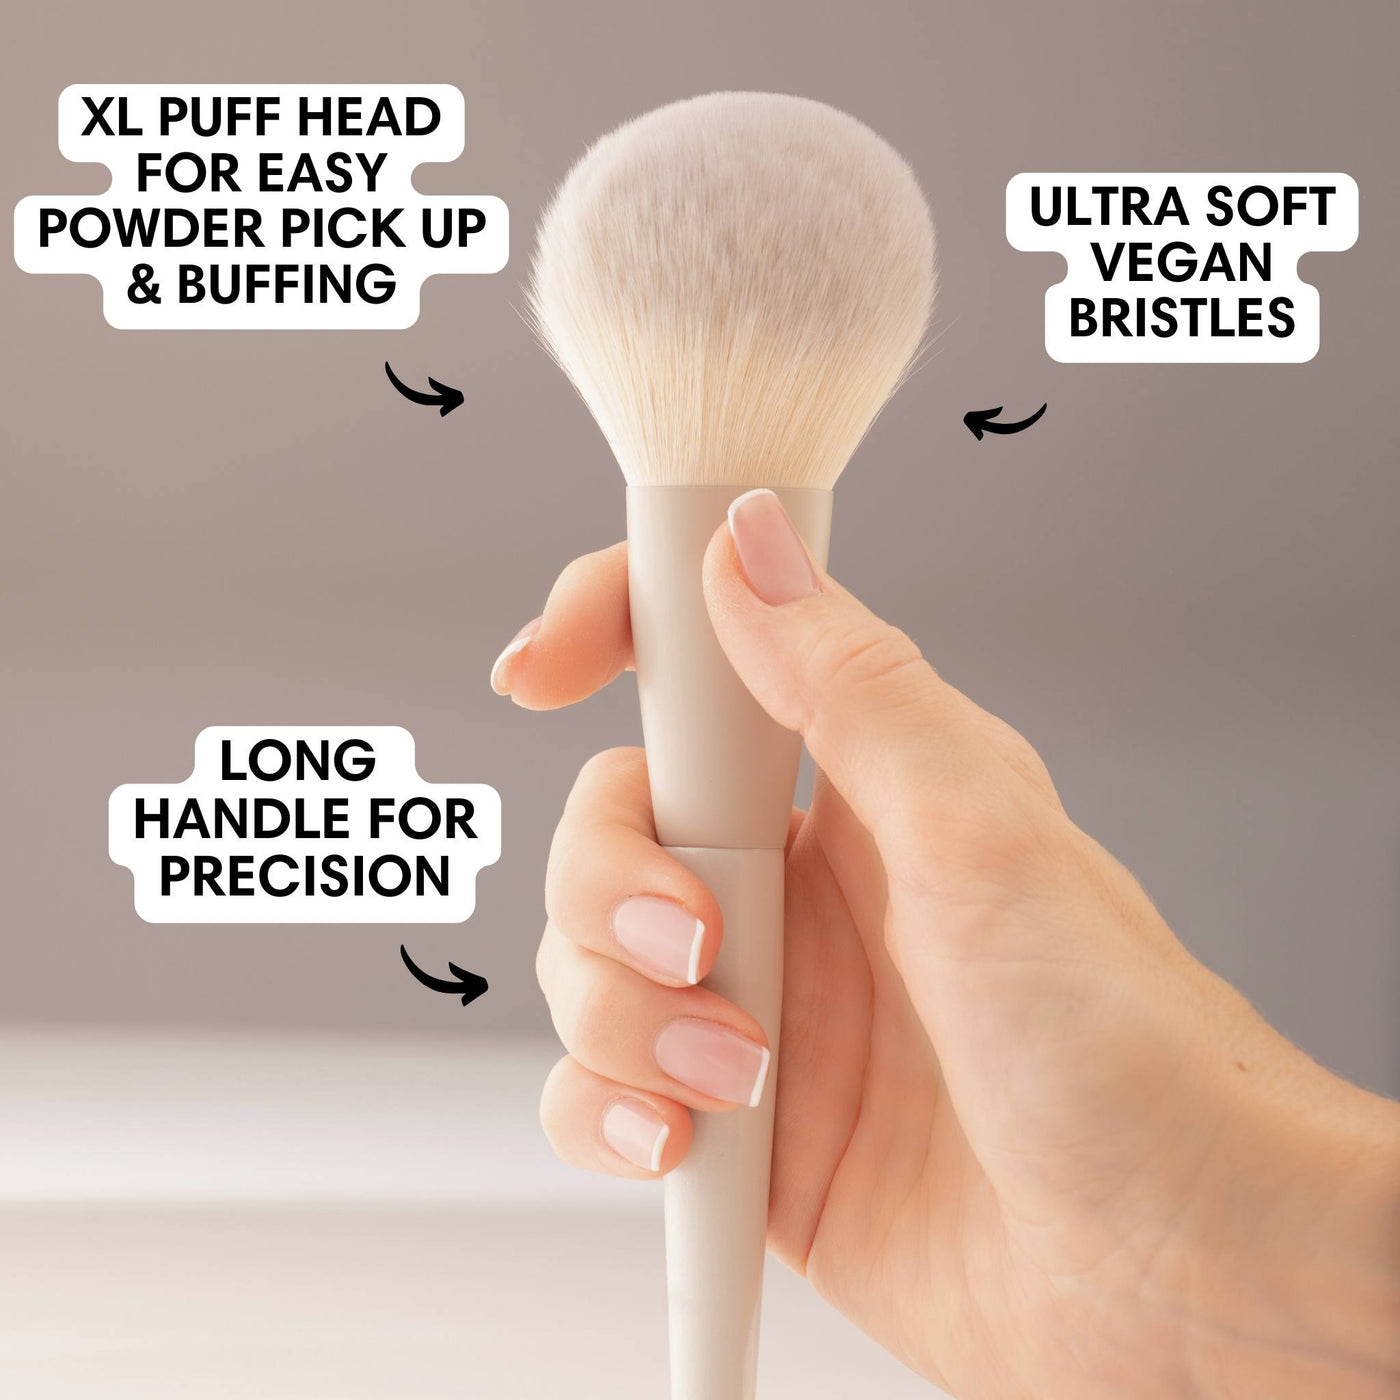 Handcrafted Puff Bristle Shape - Extra large, densely-packed bristle head provides comfortable, high-definition buffing, ensuring the perfect, streak-free finish every time.